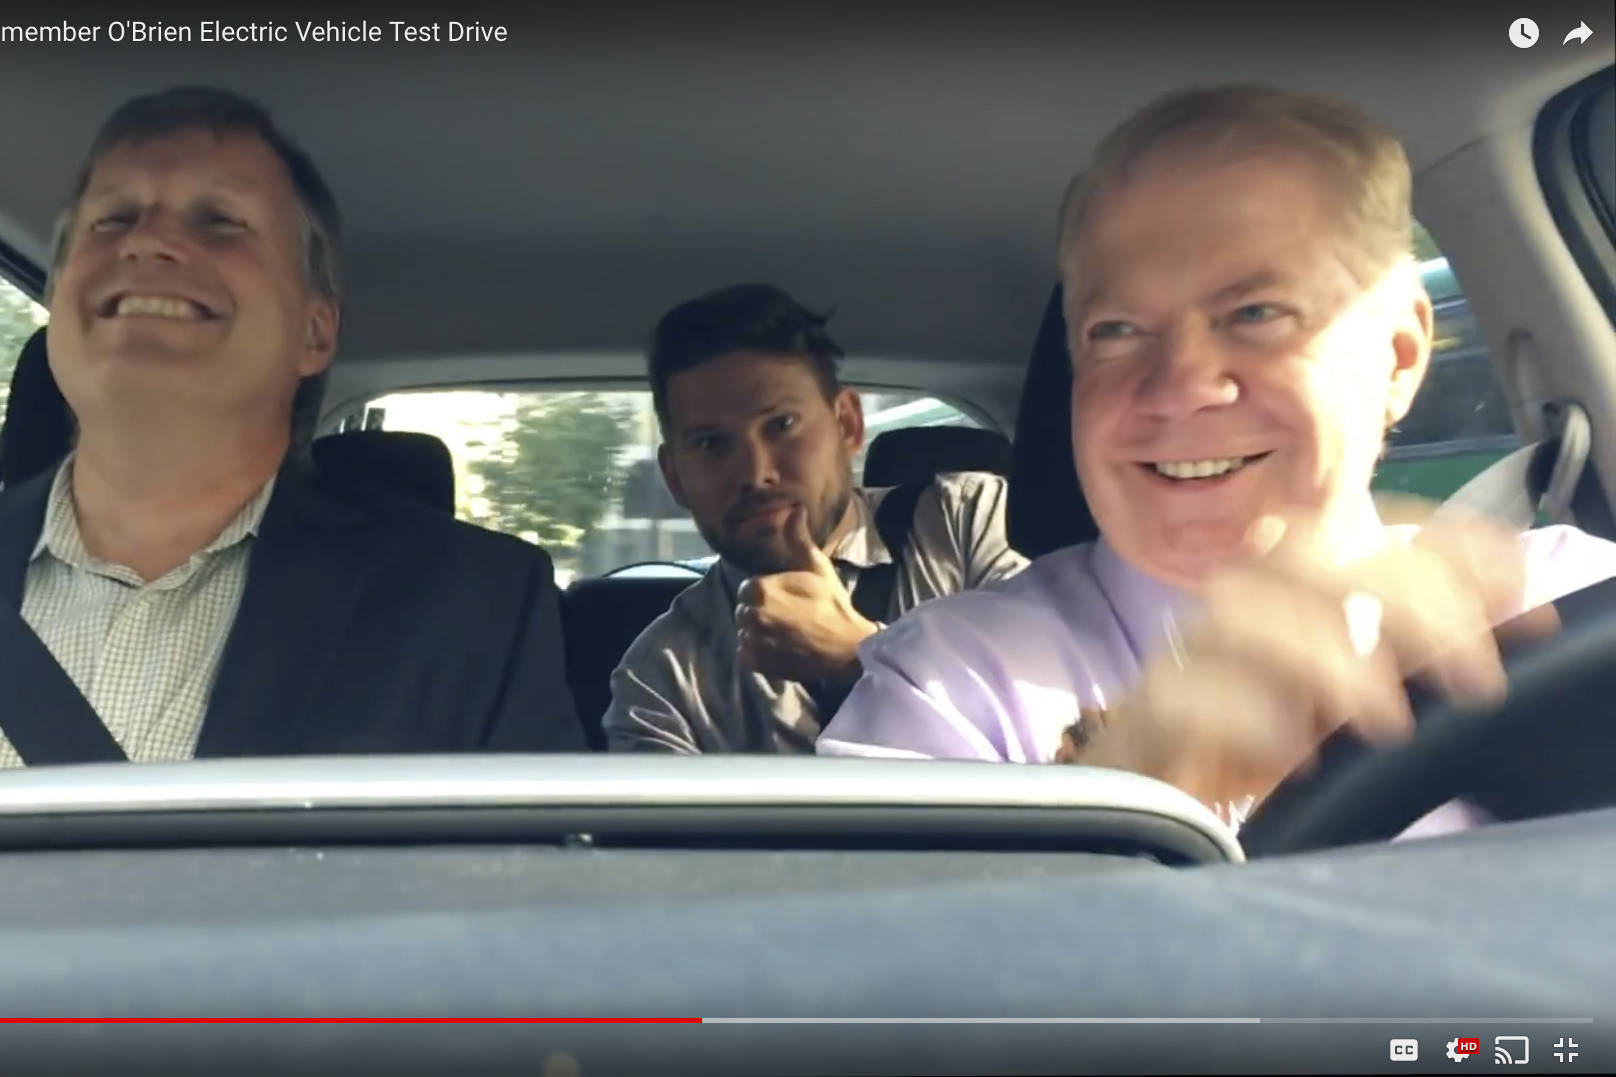 Left to right: Seattle City Councilmember Mike O’Brien, mayoral staffer Will Lemke, and Mayor Ed Murray ‘test-drive’ an electric car in September 2016. Screenshot via Seattle City Council